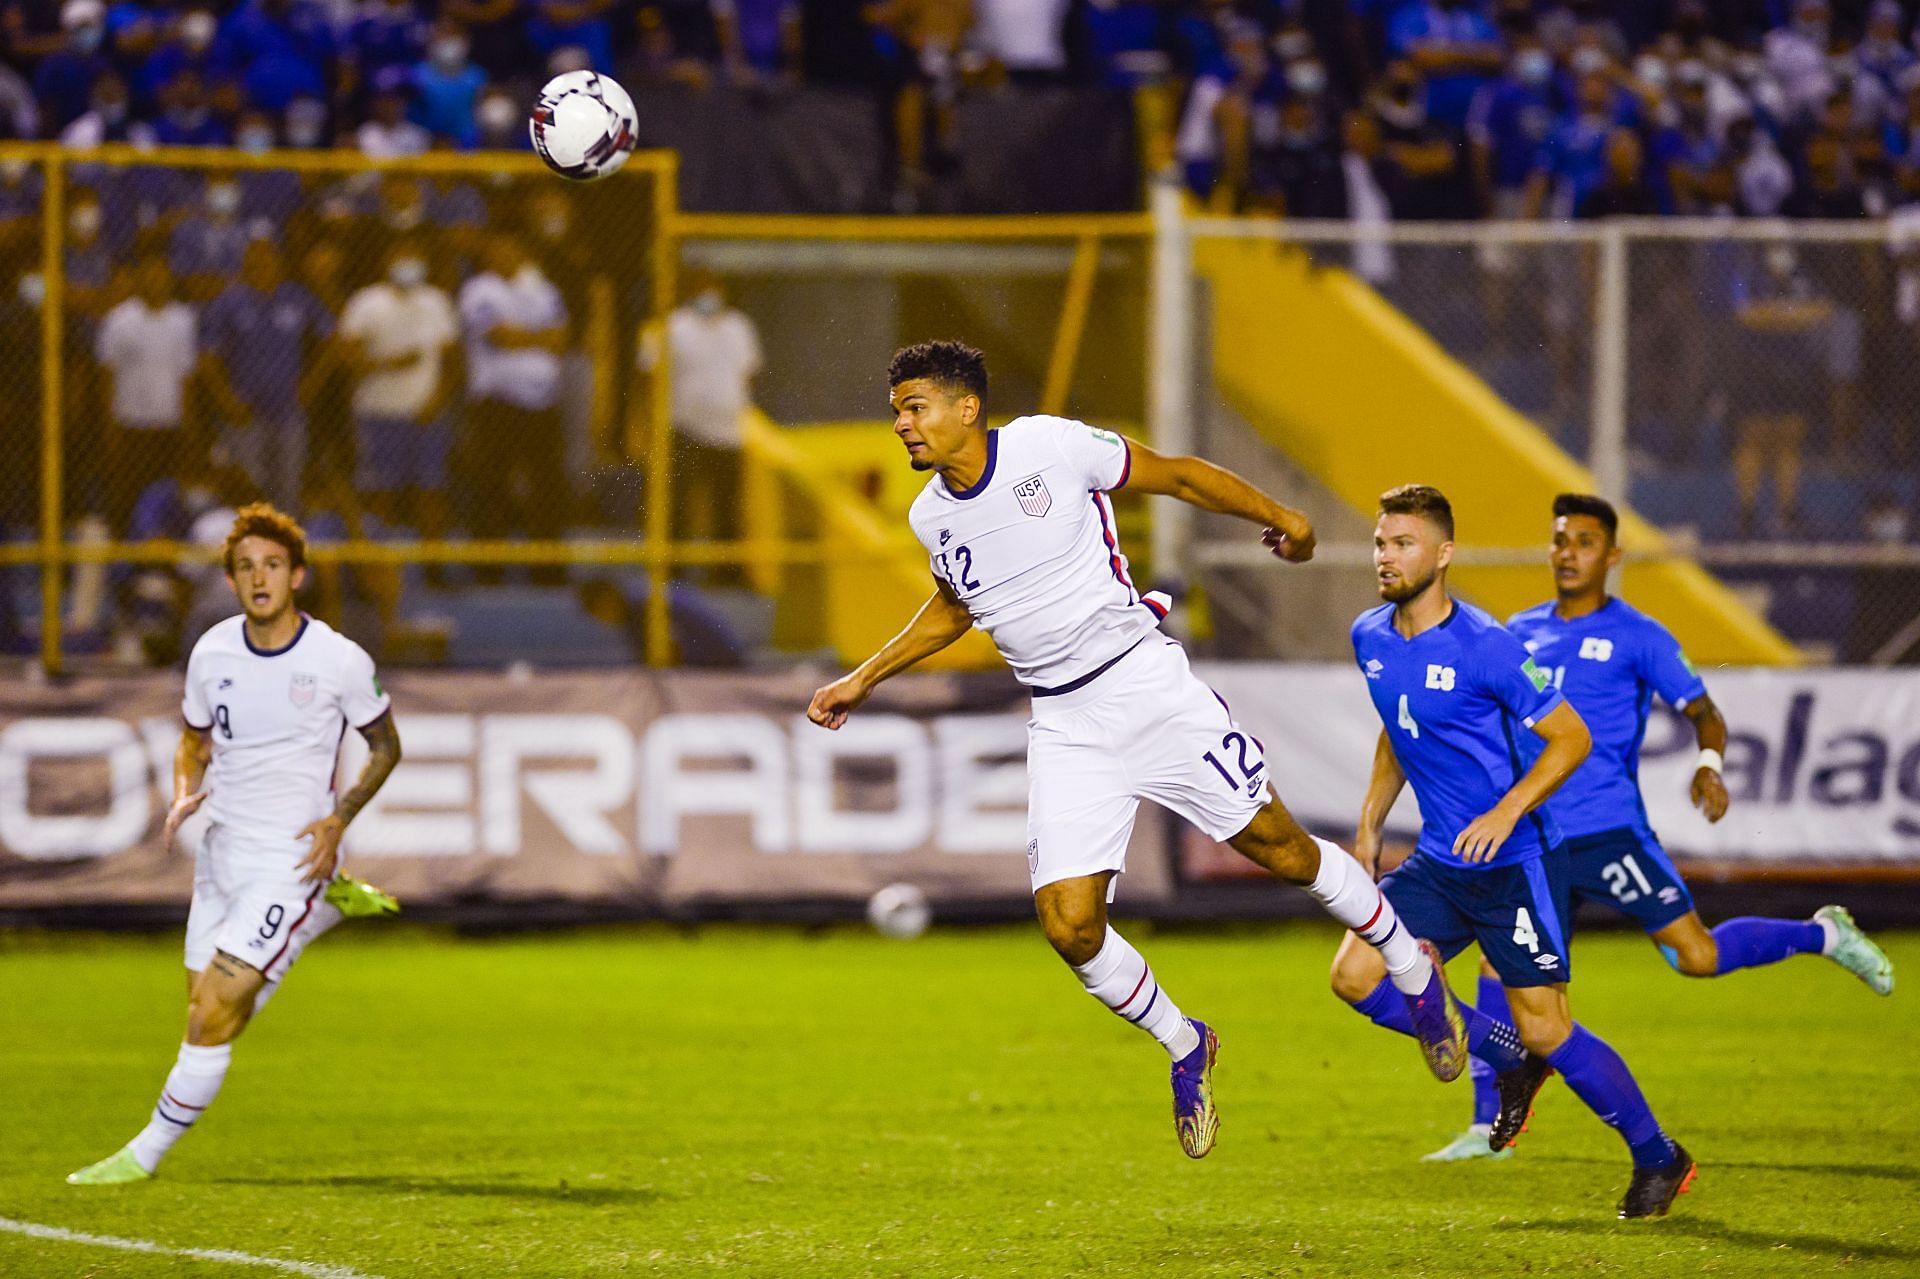 El Salvador and the USA meet in their CONCACAF Nations League fixture on Tuesday